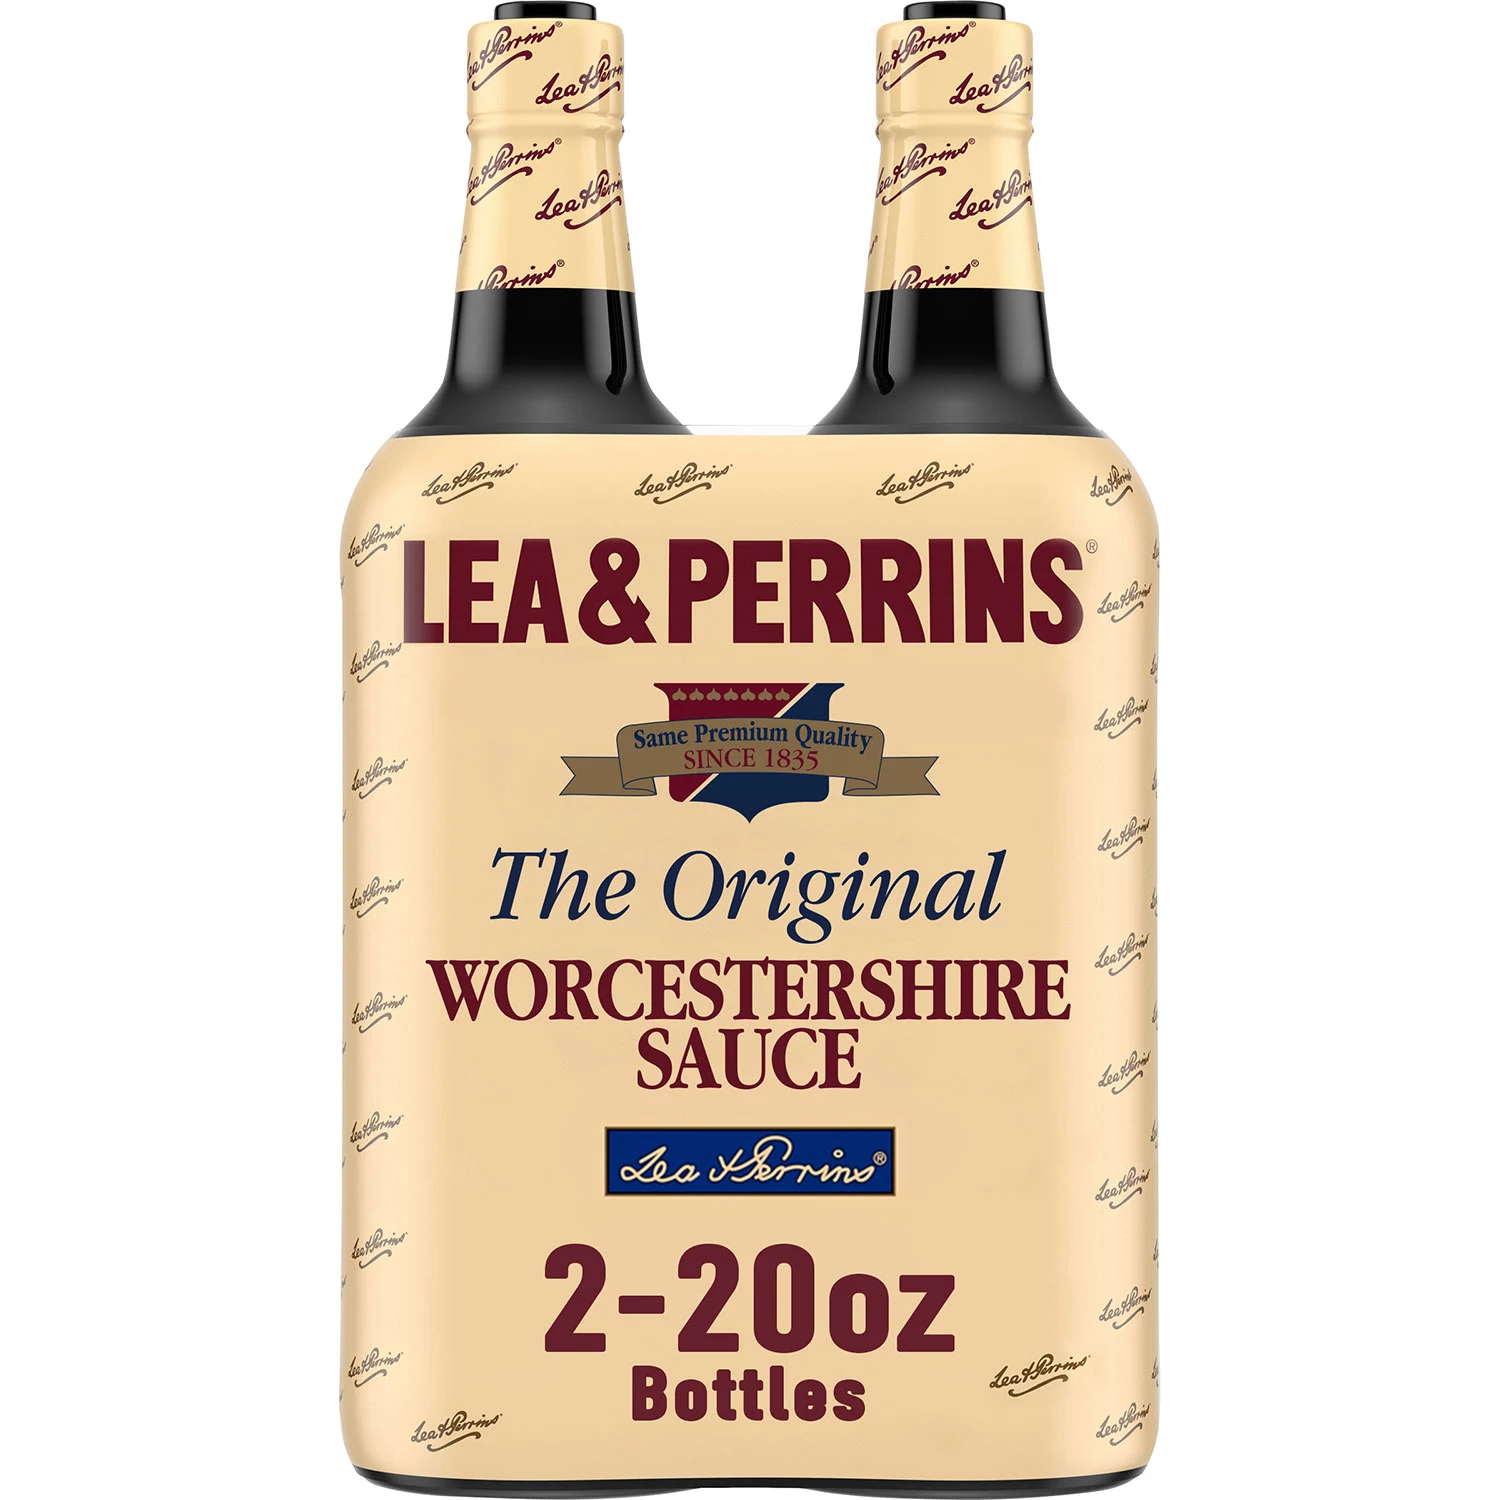 Lea and Perrins The Original Worcestershire Sauce